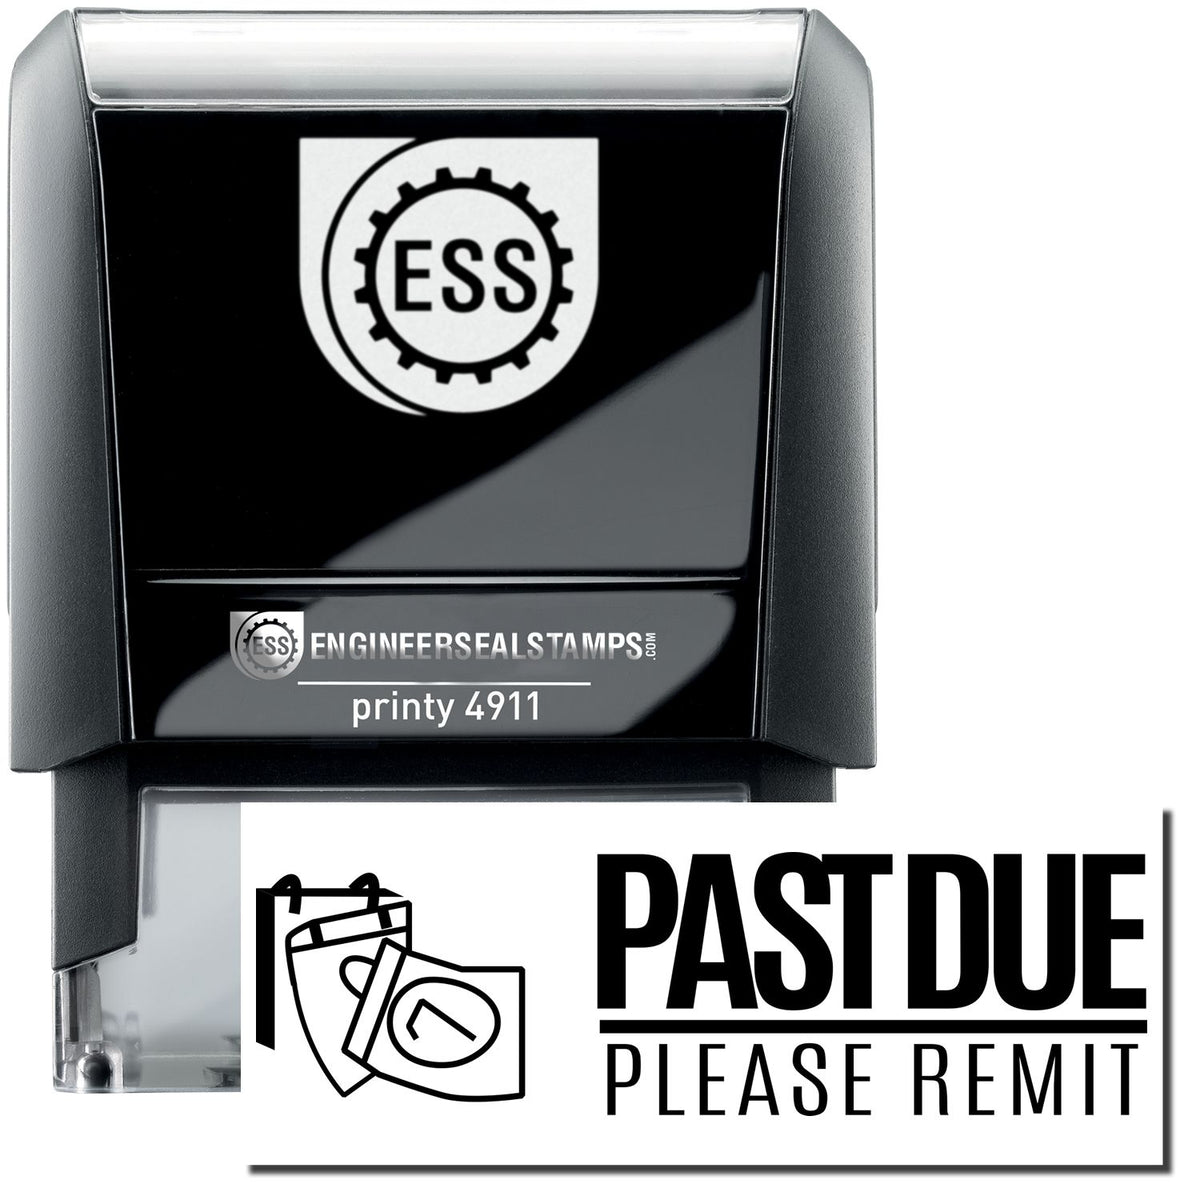 A self-inking stamp with a stamped image showing how the text &quot;PAST DUE PLEASE REMIT&quot; (&quot;PAST DUE&quot; in a bold font with a line underneath and &quot;PLEASE REMIT&quot; in narrow font under the line) with an icon of a calendar is displayed after stamping.